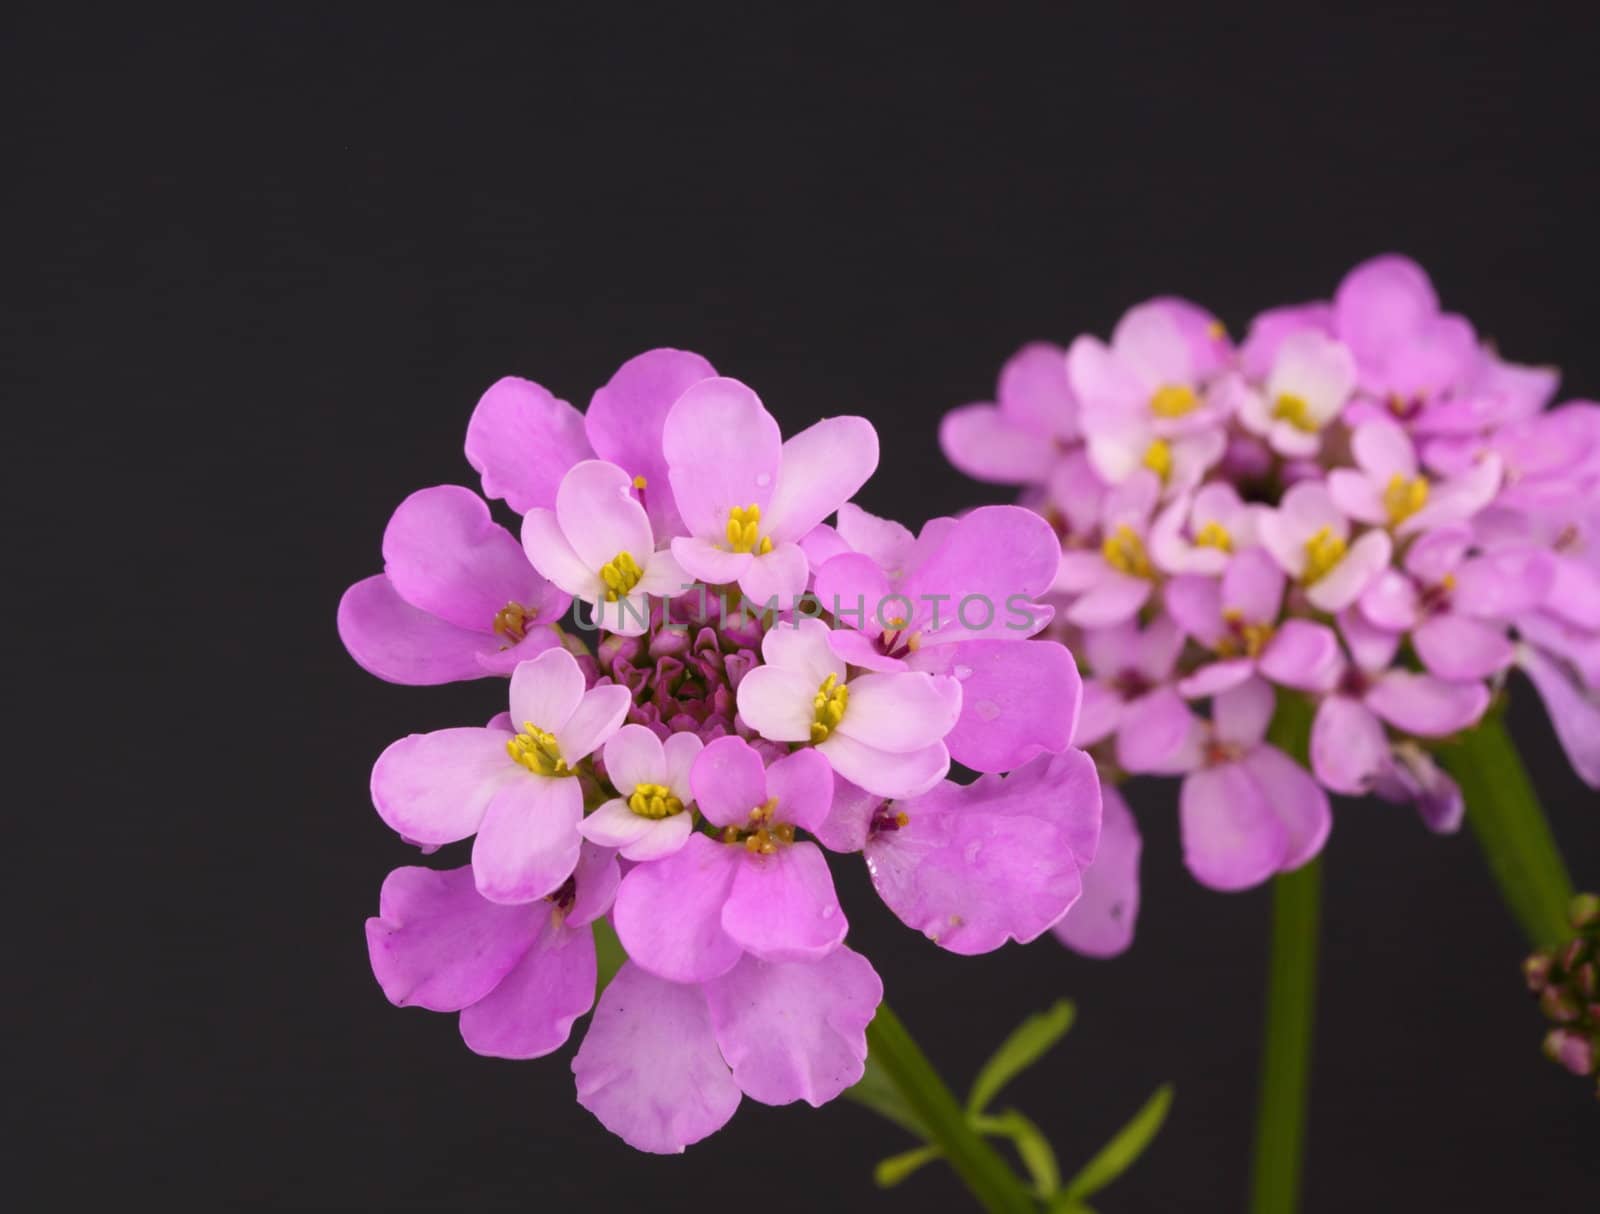 candytuft by mitzy